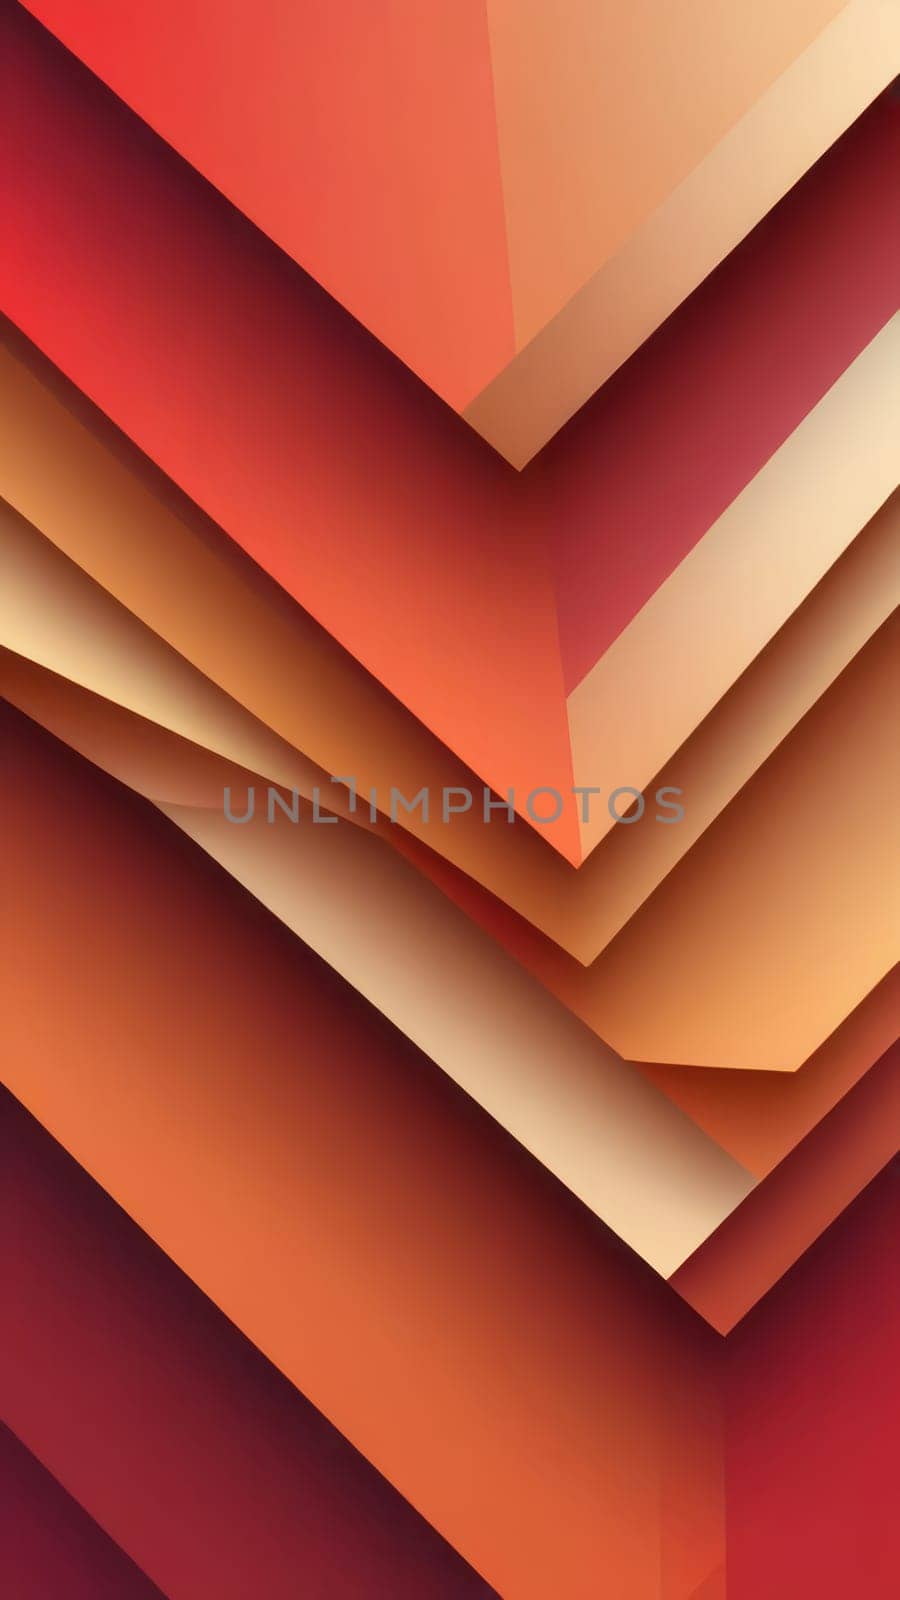 Art for inspiration from Layered shapes and red by nkotlyar